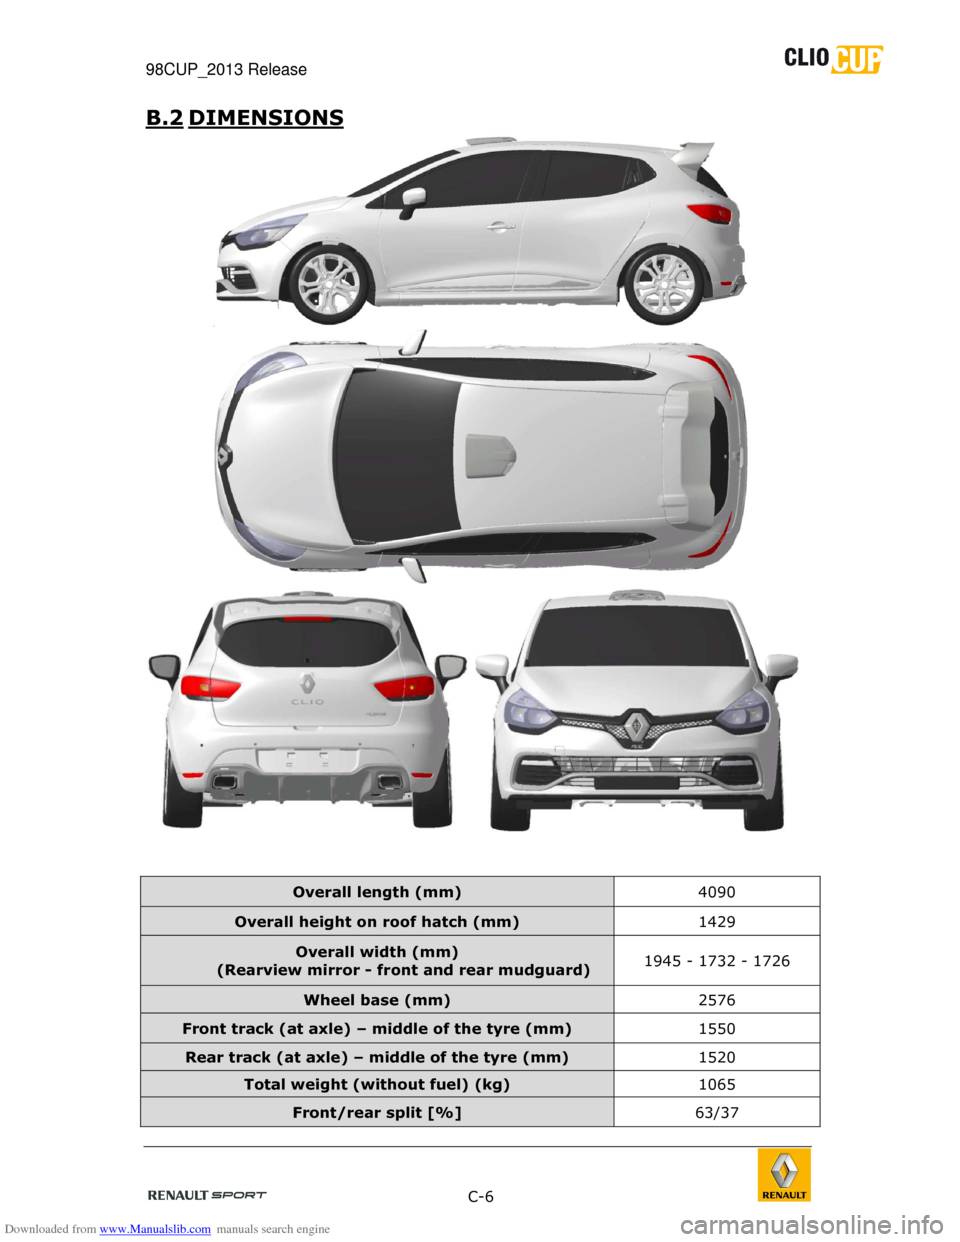 RENAULT CLIO CUP 2013 X85 / 3.G User Manual Downloaded from www.Manualslib.com manuals search engine 98CUP_2013 Release    
 
 C-6  
 
B.2  DIMENSIONS 
 
 
 
   
Overall length (mm)  4090 
Overall height on roof hatch (mm)  1429 
Overall width 